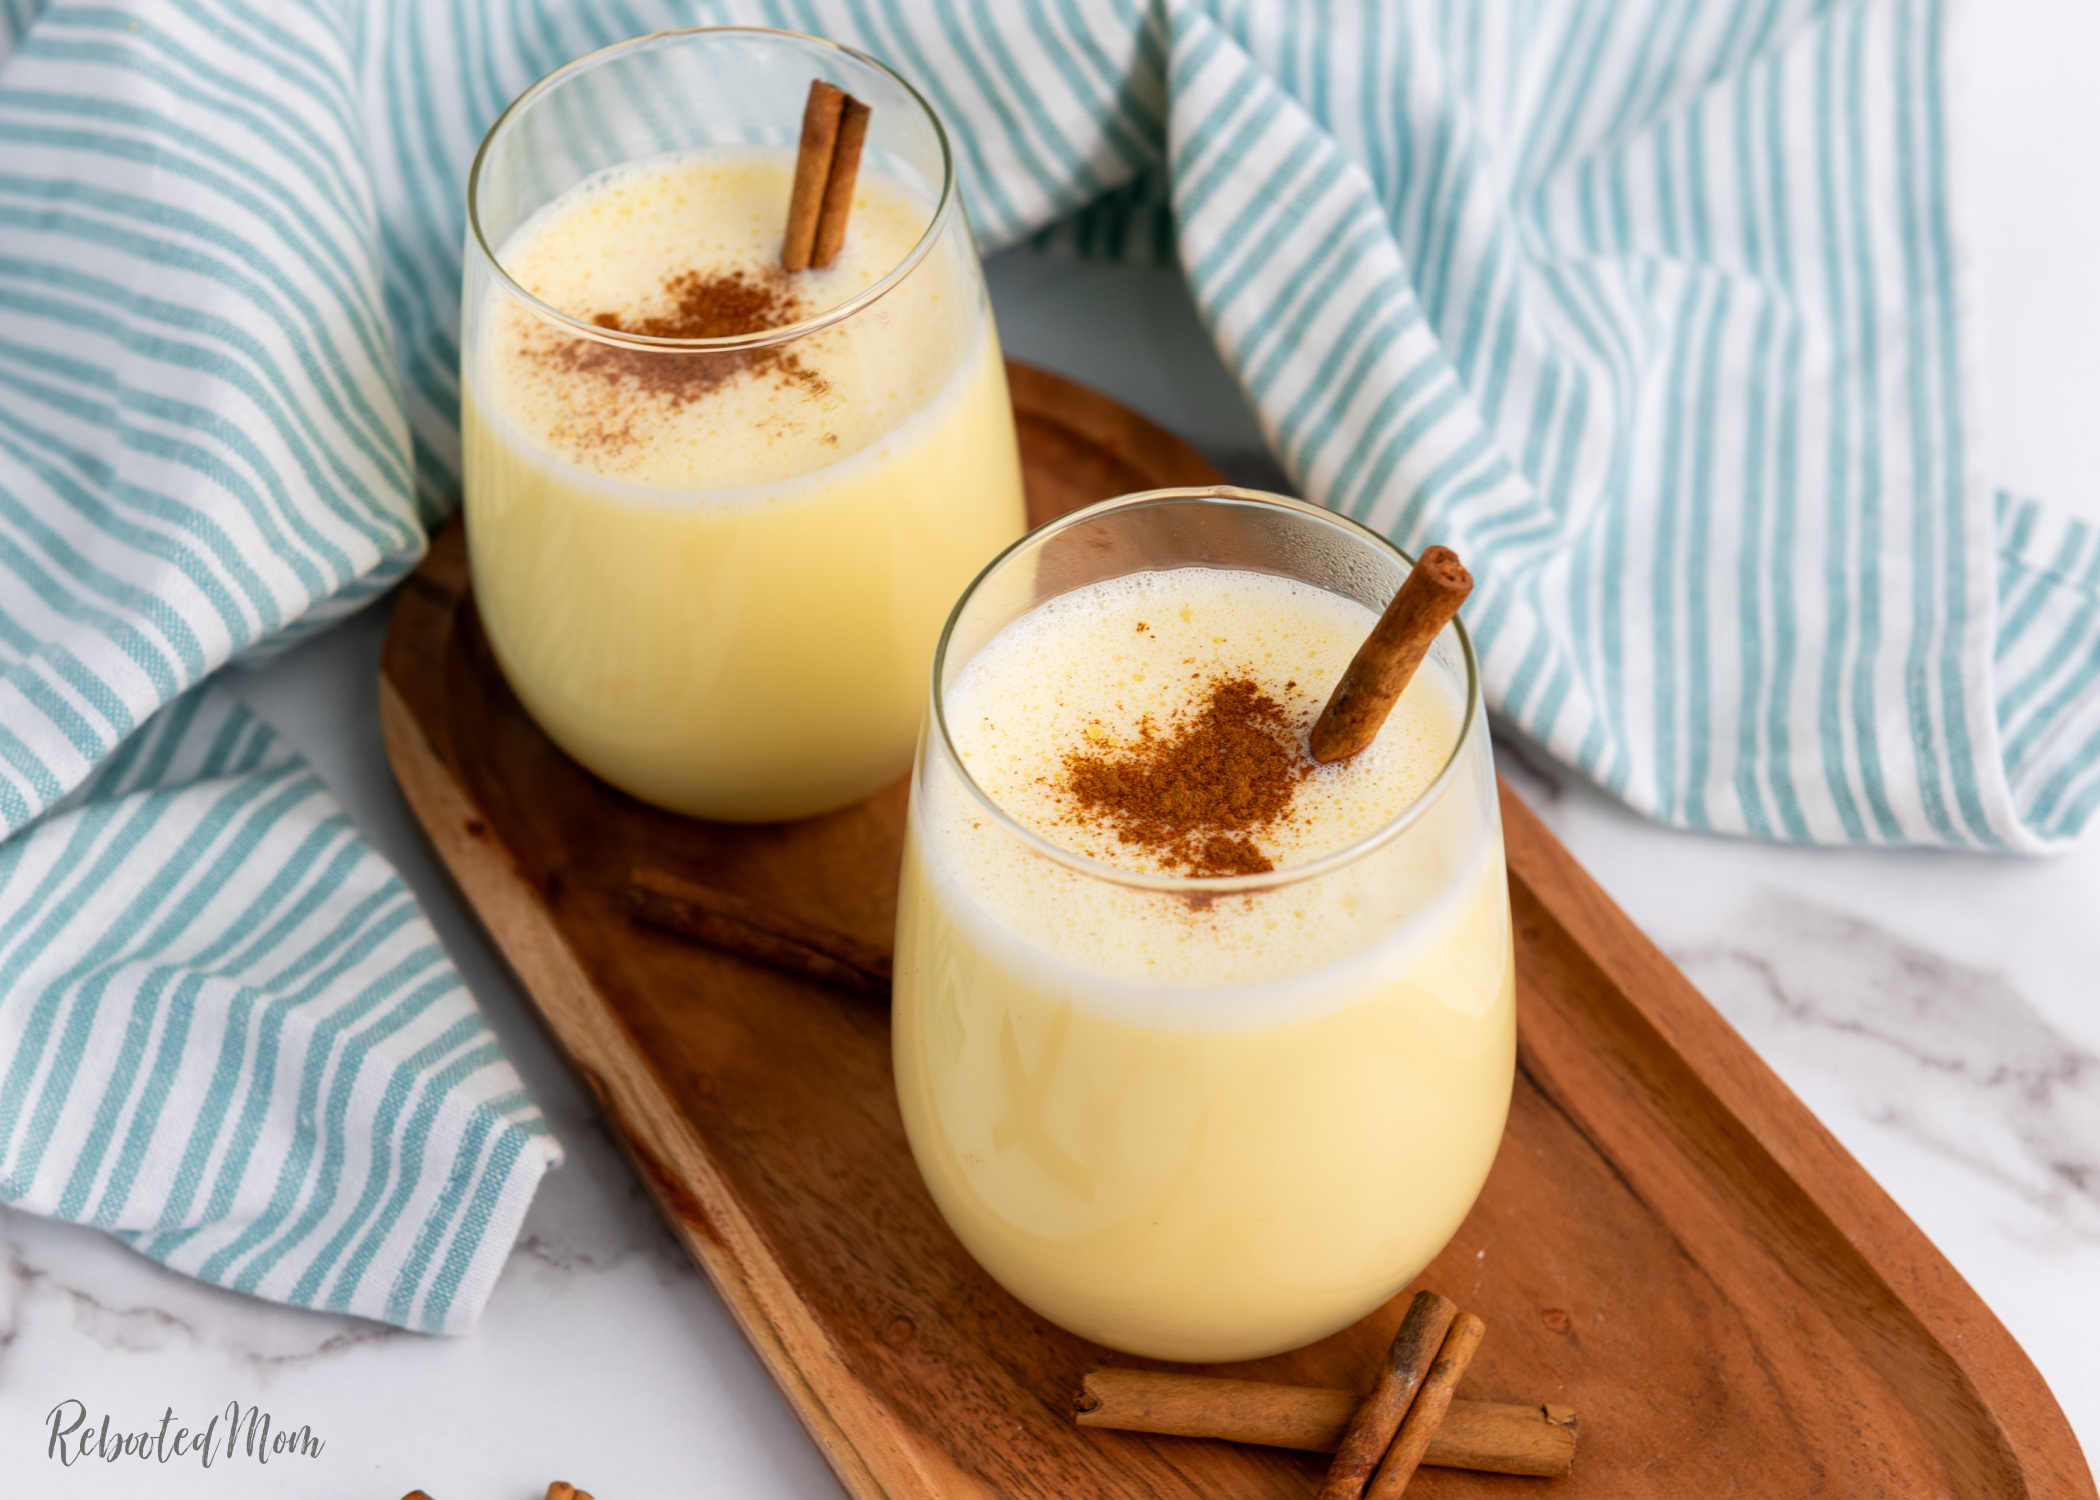 This homemade eggnog is rich, delicious, creamy, and easy to make - not to mention it tastes so much better than store-bought!